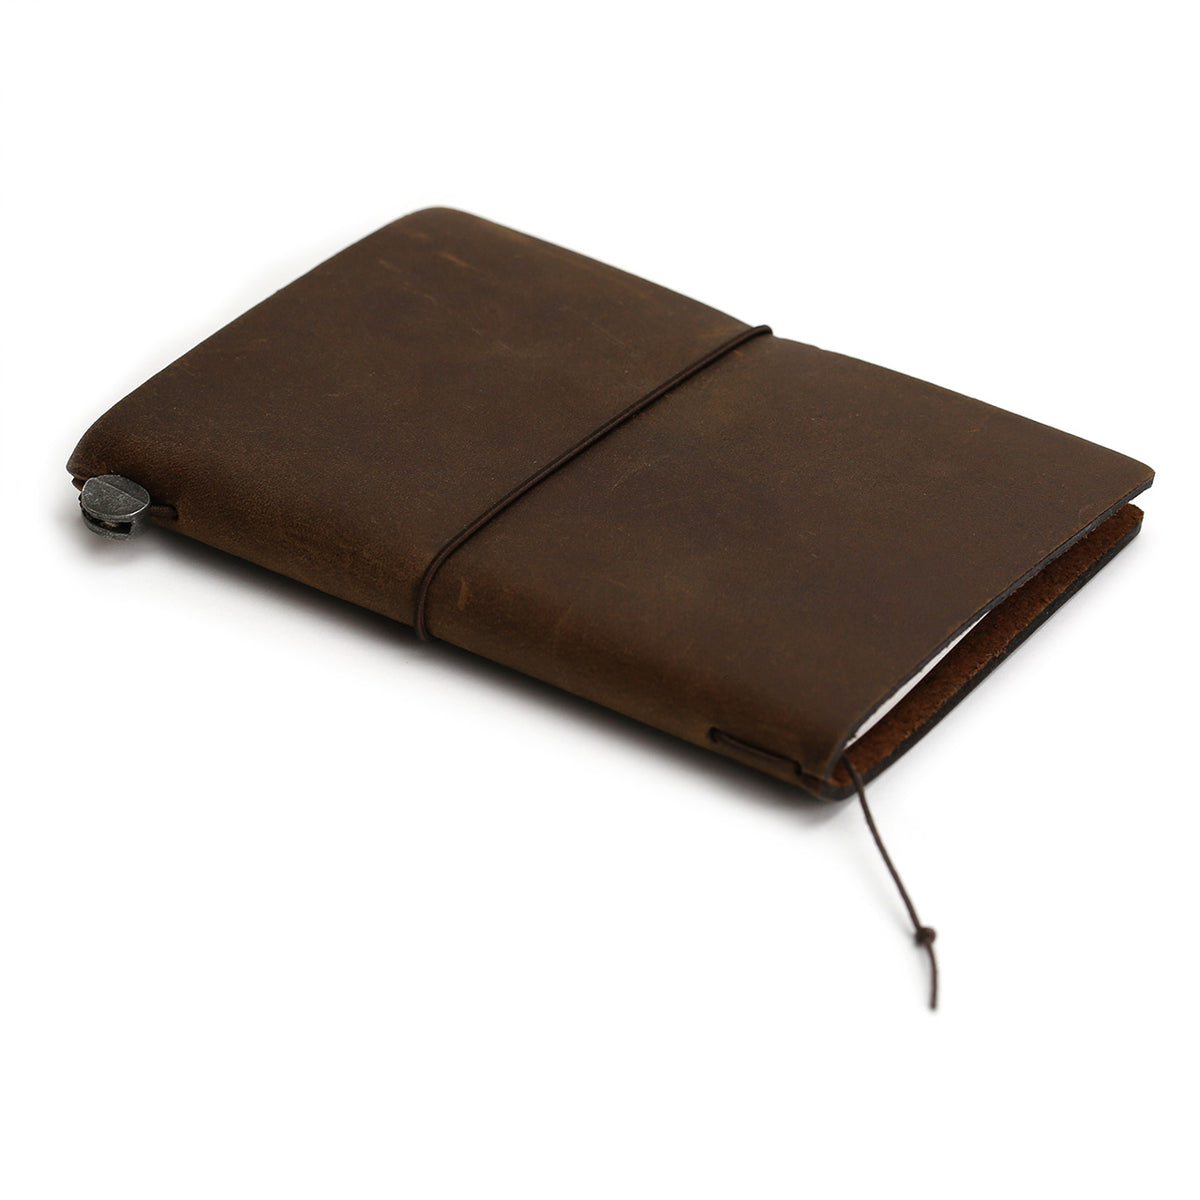 Brown Passport sized notebook cover, three-quarter angle